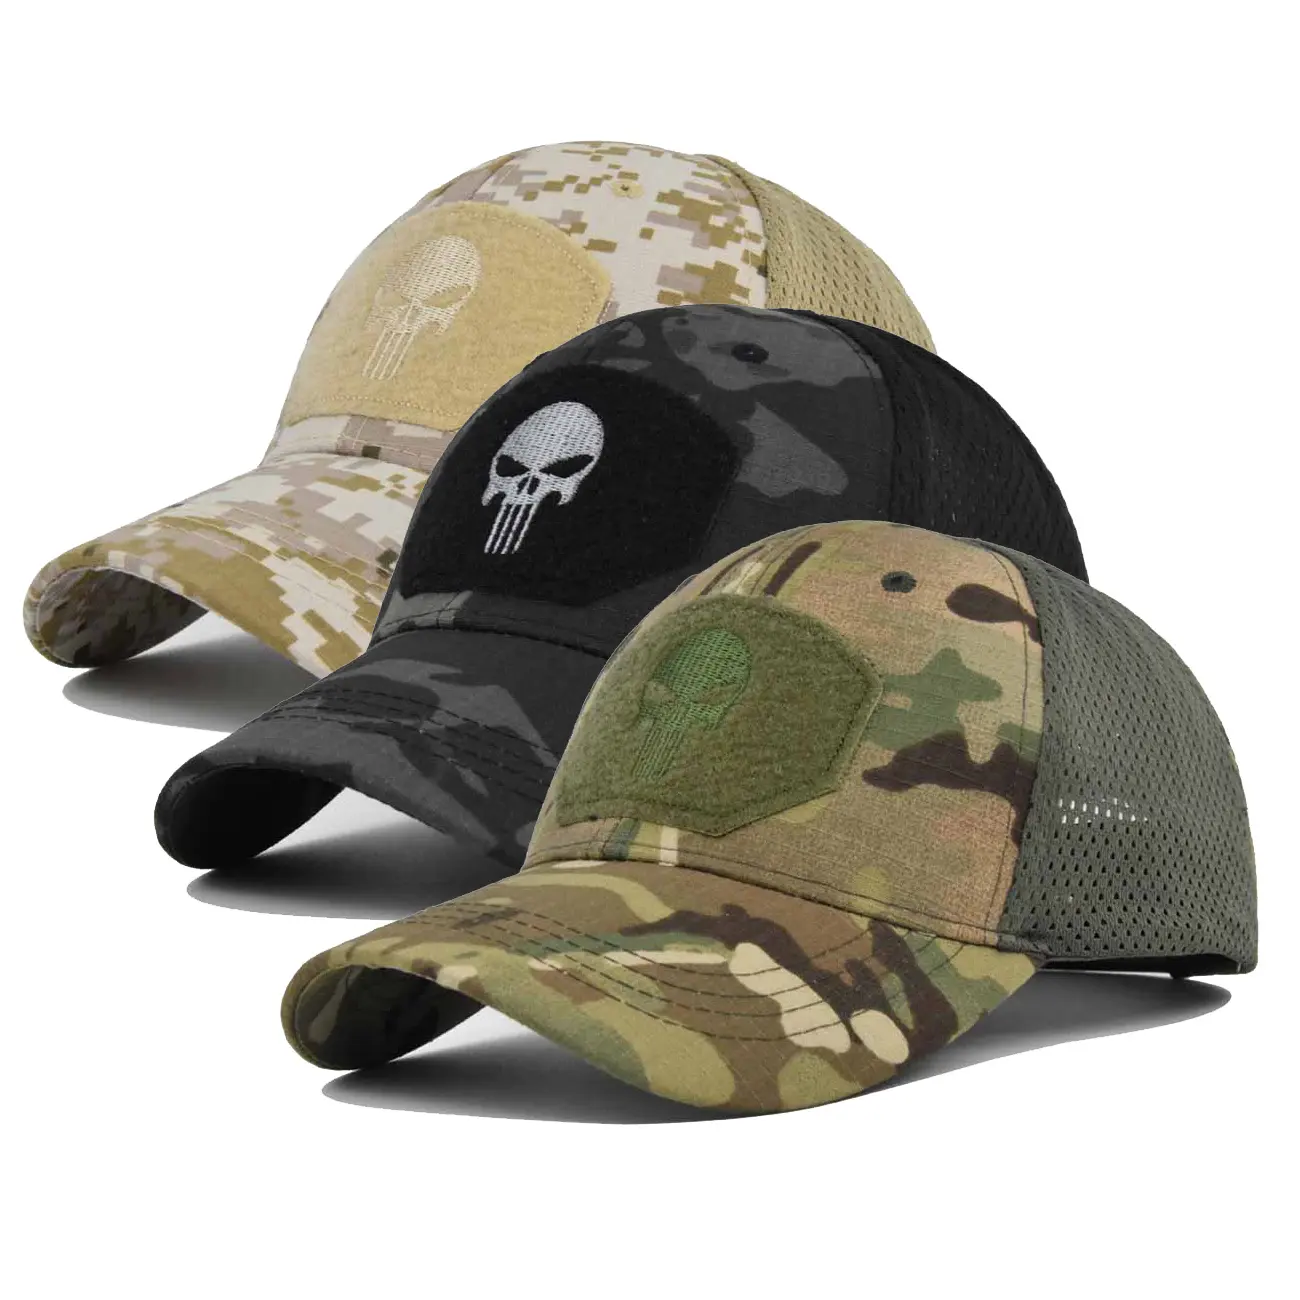 Hot Selling Men Outdoor Camouflage Hat Summer breathable net Hunting Skull Tactical Cap Hats Sport Cycling Baseball Caps